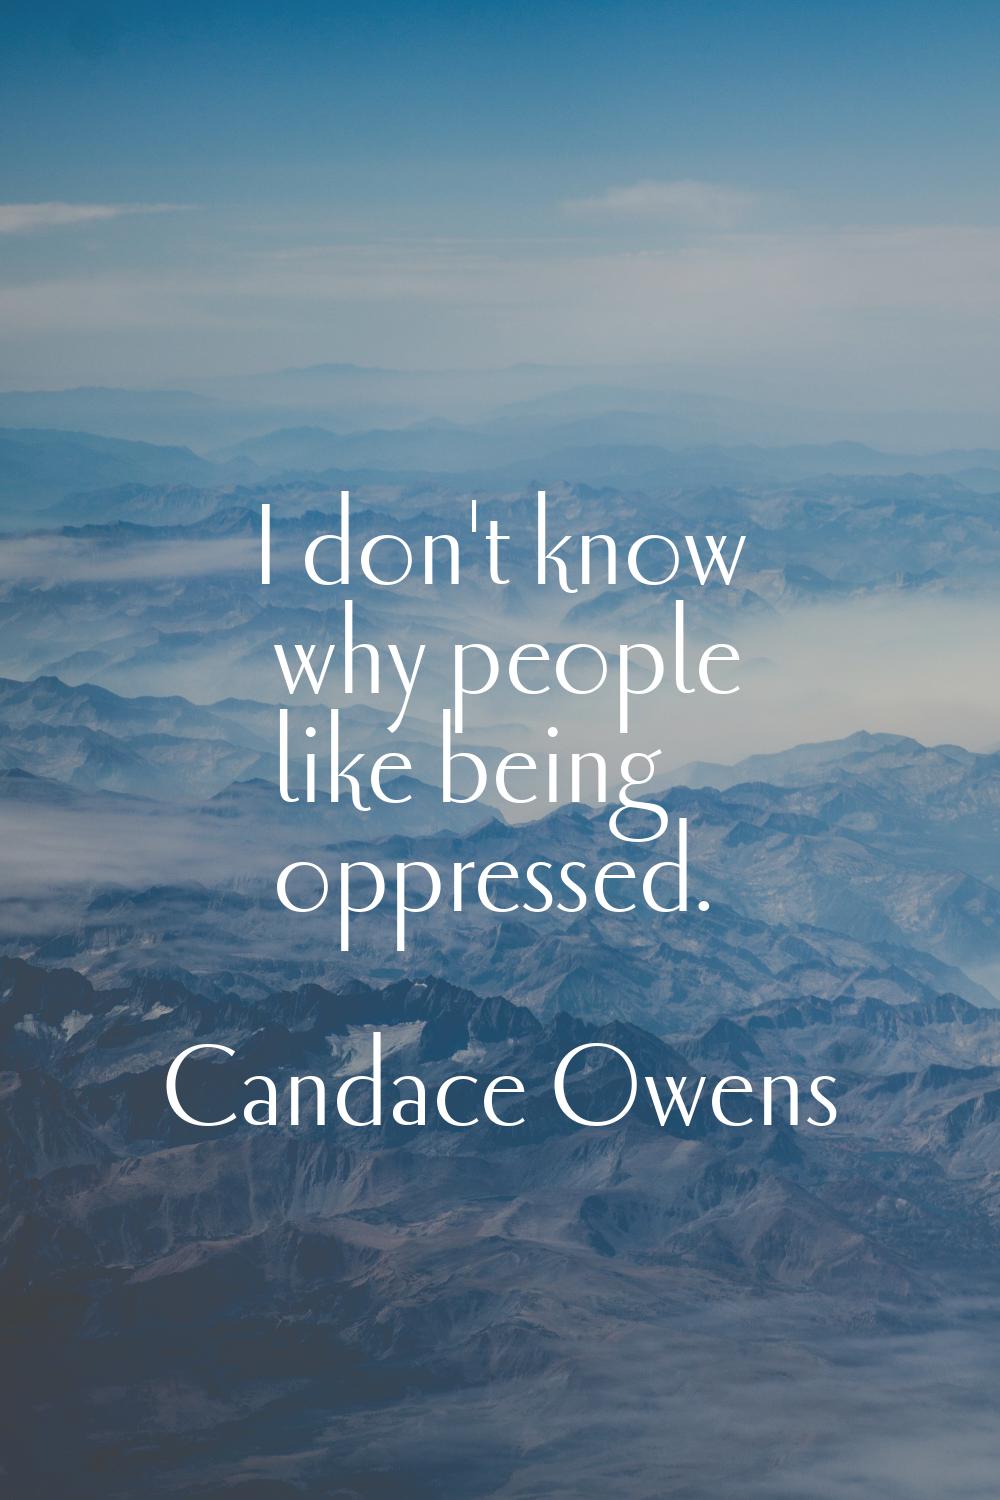 I don't know why people like being oppressed.